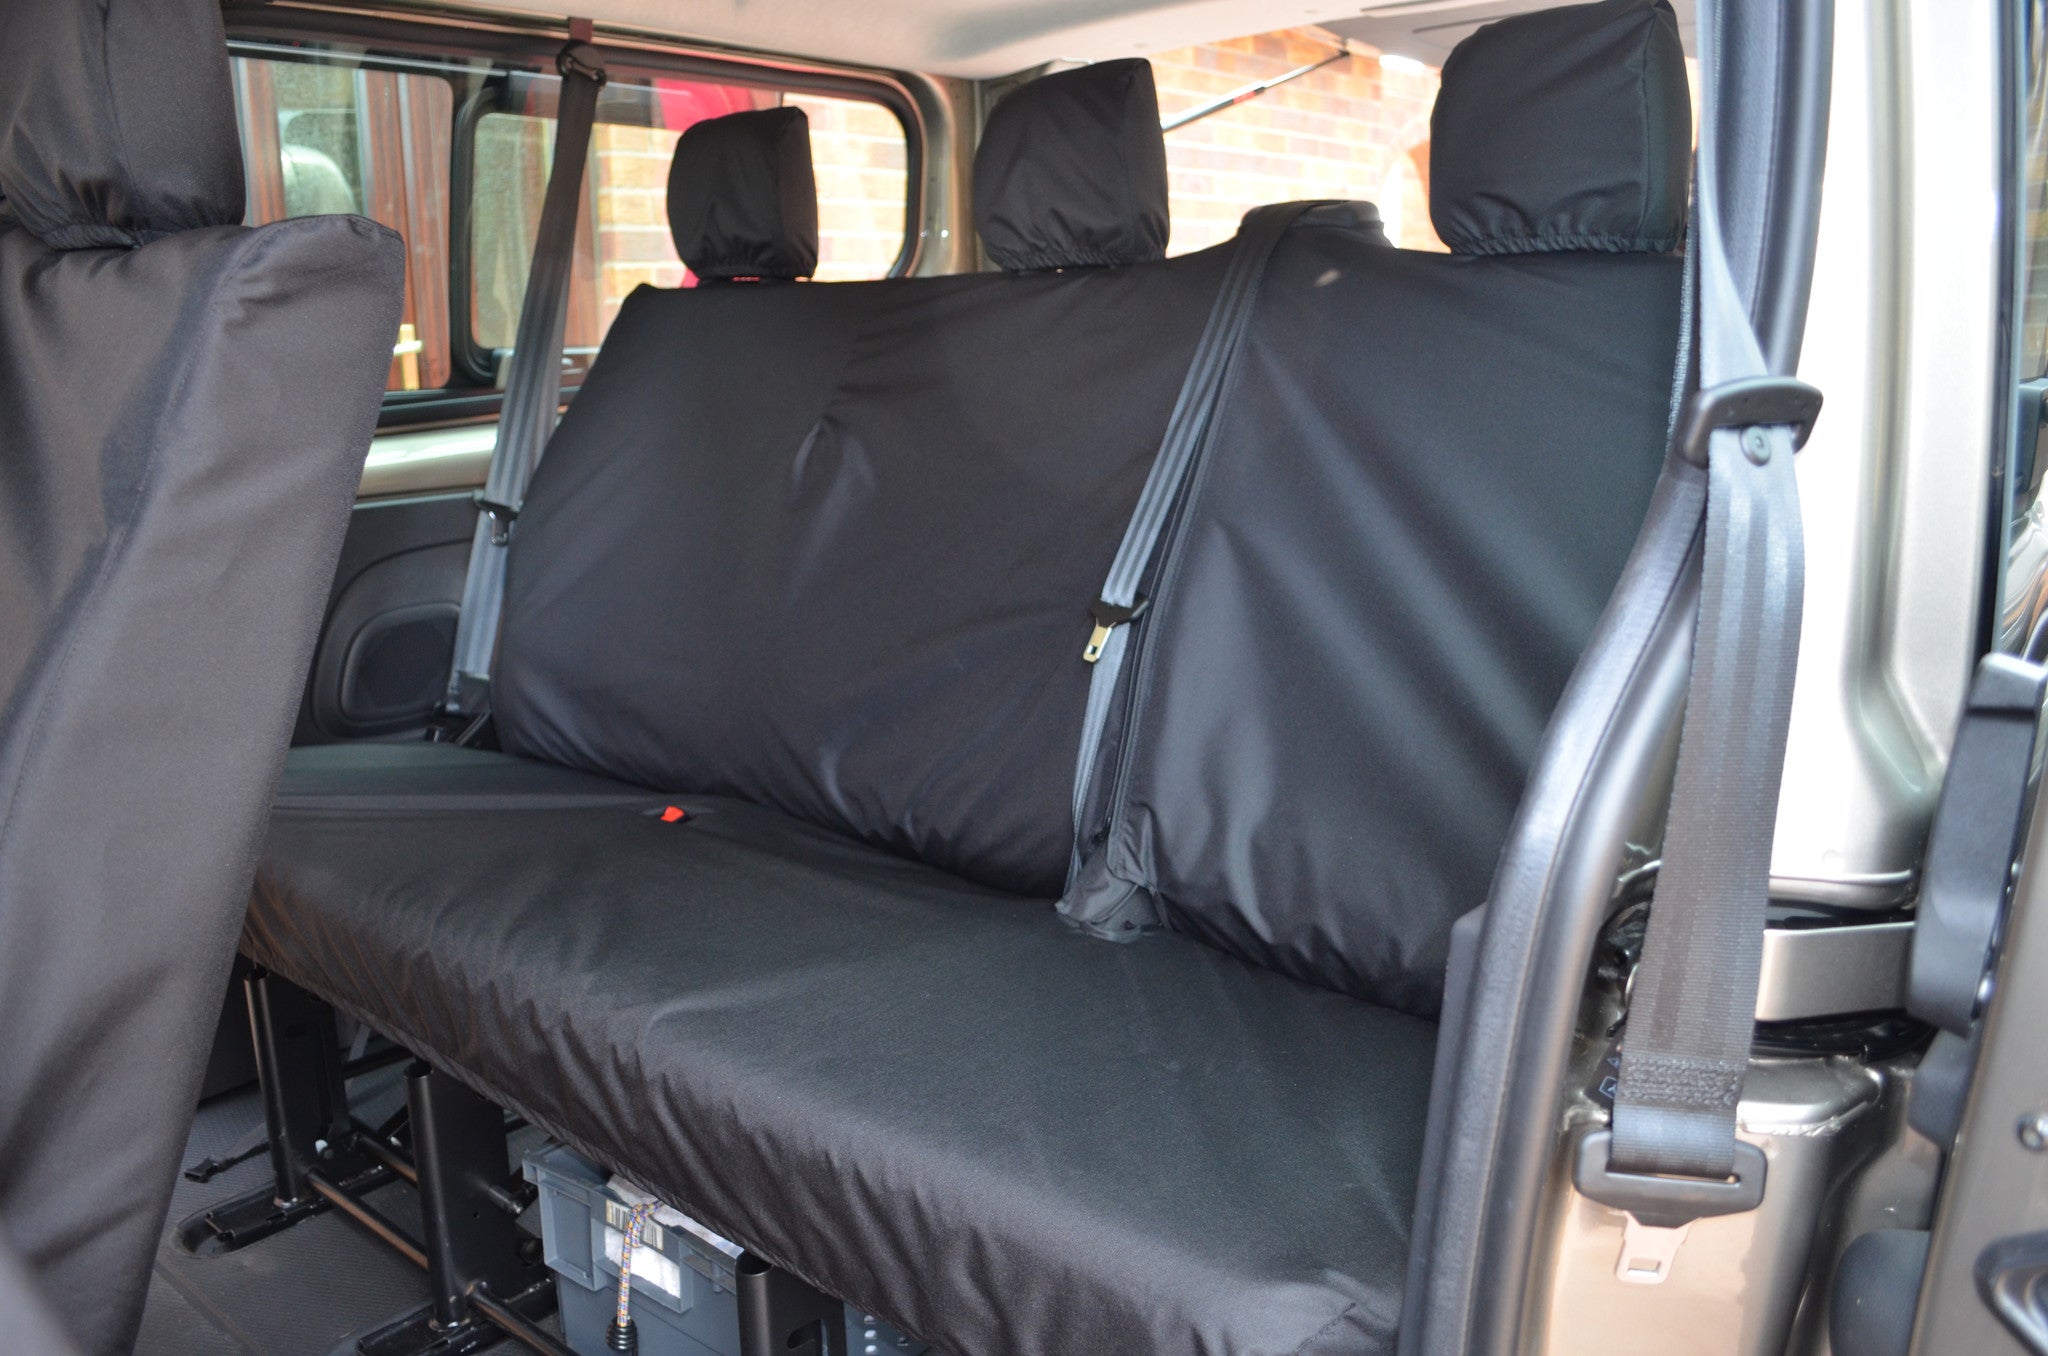 Renault Trafic Passenger 2014 Onwards 9-Seater Minibus Seat Covers Black / 3rd Row Rear Turtle Covers Ltd